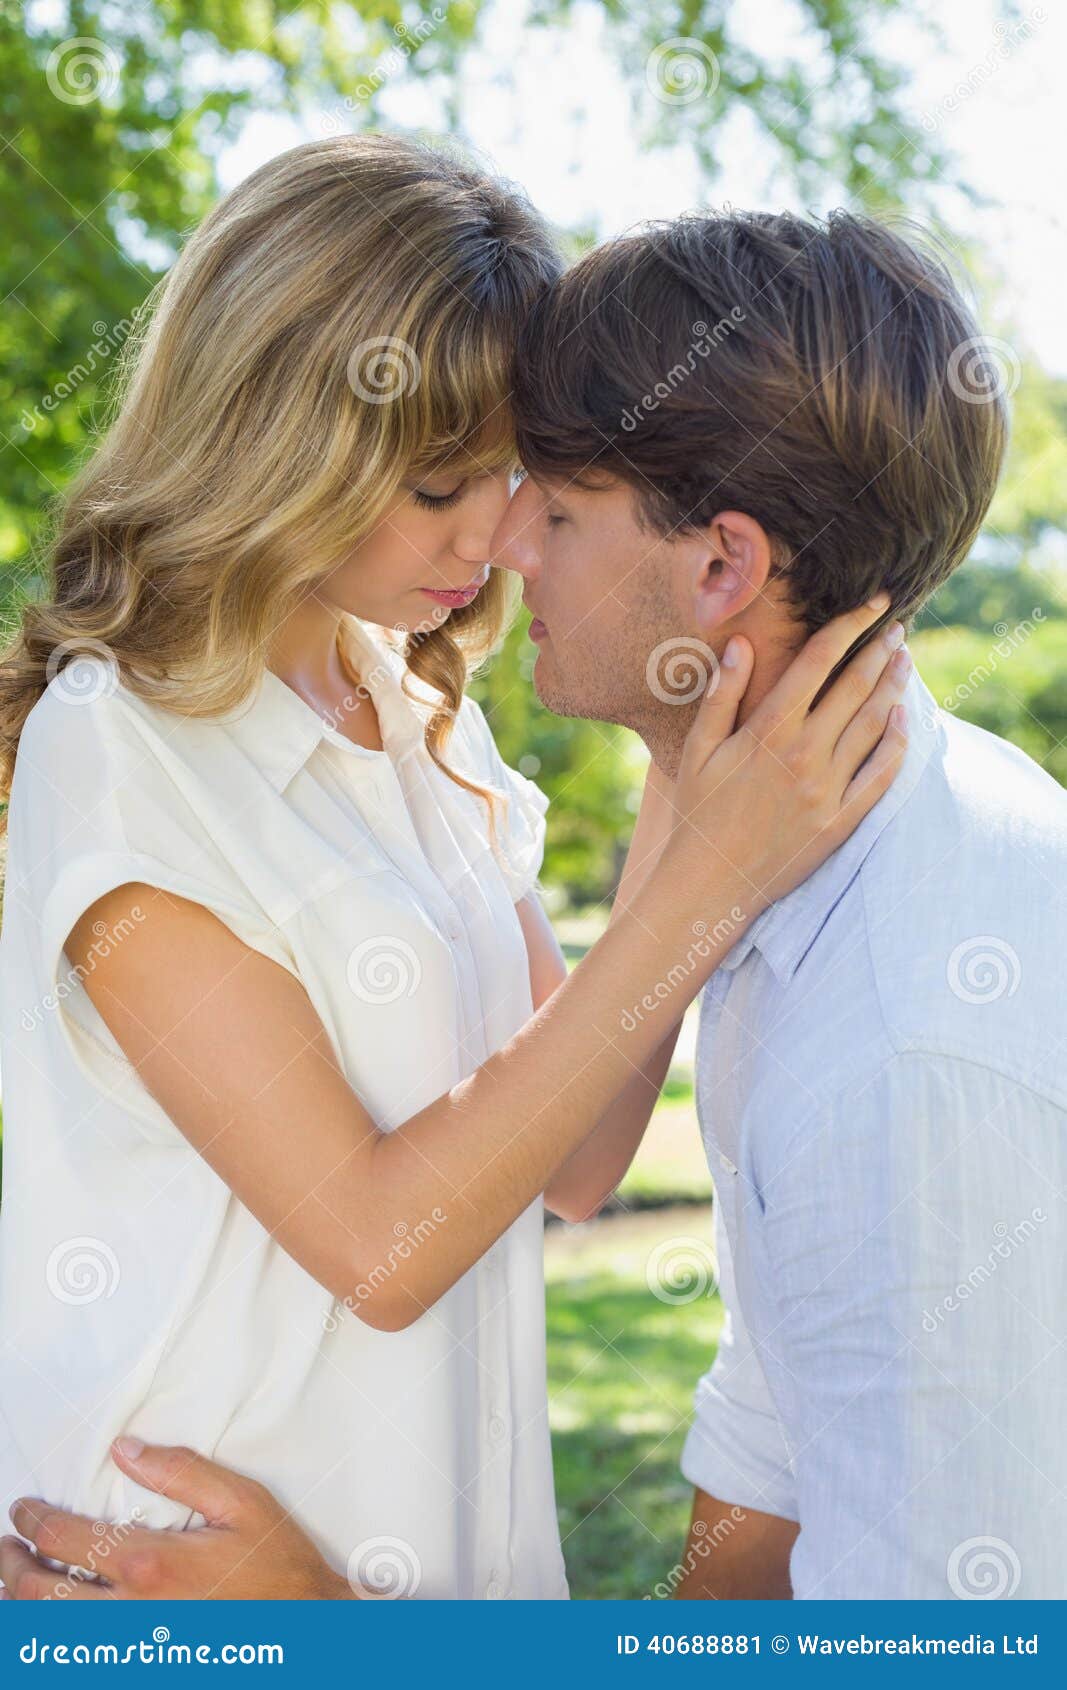 Cute Couple Hugging And Kissing In The Park Stock Image Image Of Park Affection 40688881